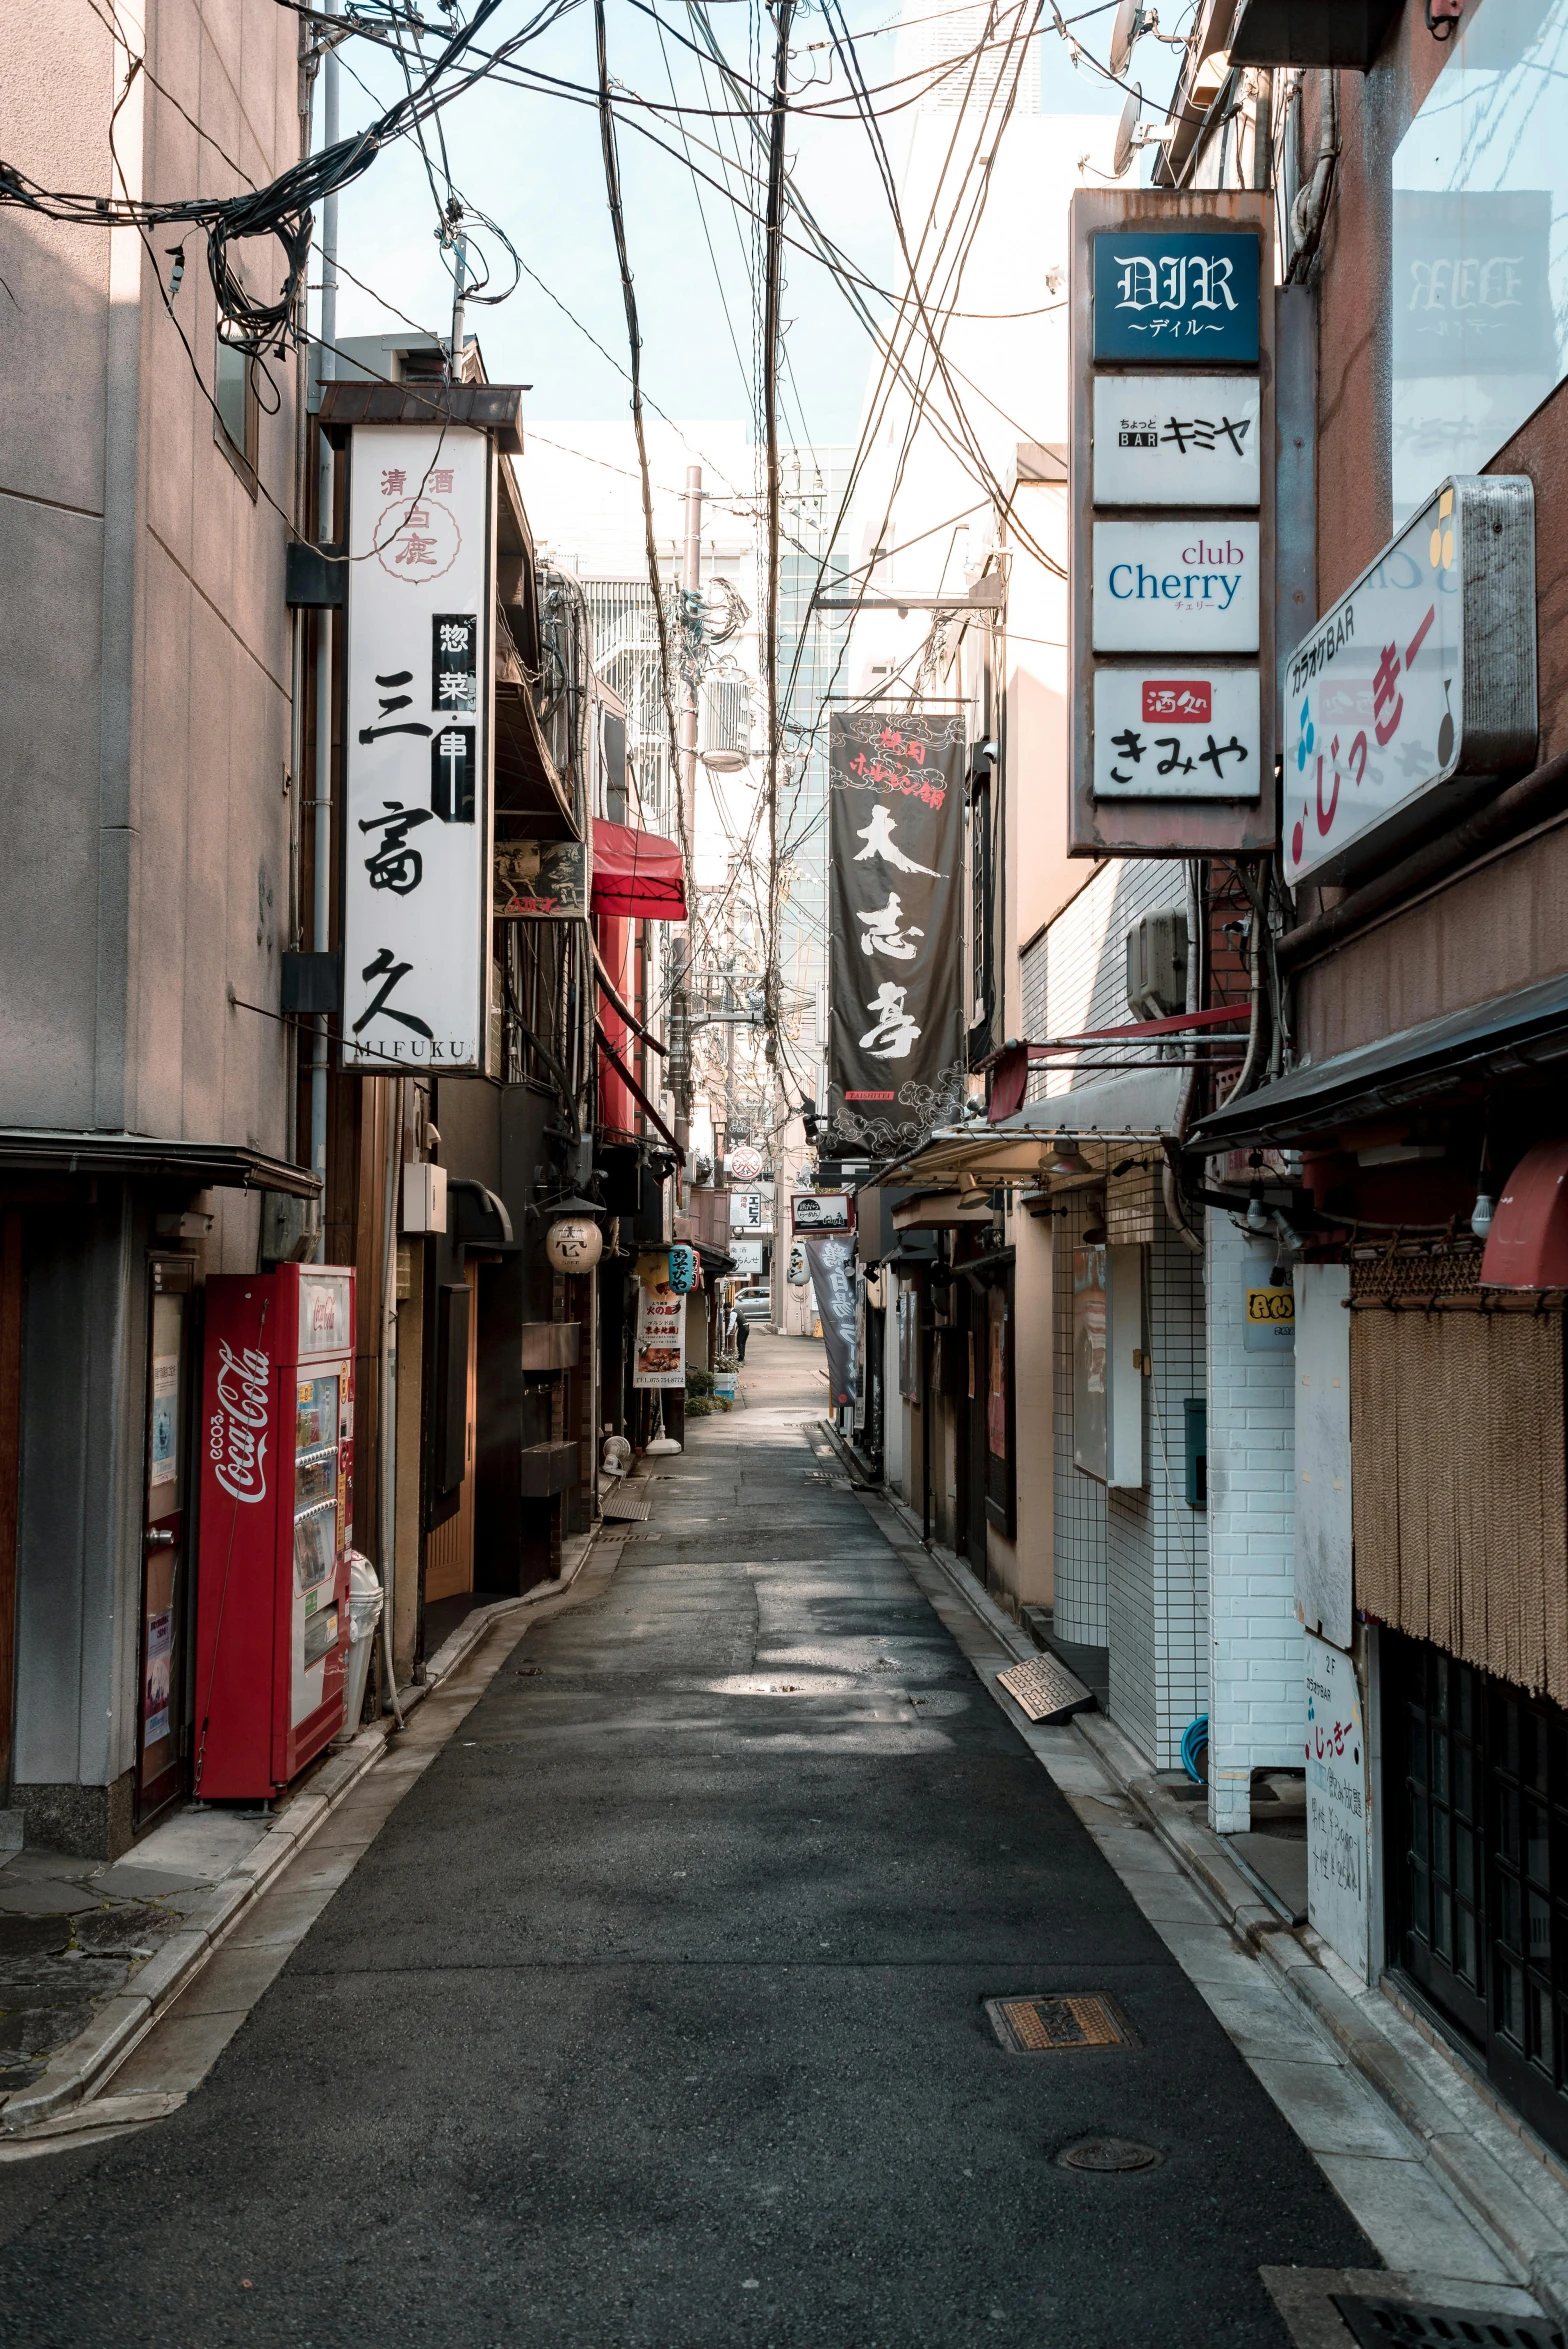 a narrow alley in the middle of a city, inspired by Kanō Hōgai, trending on unsplash, deserted shinjuku junk, fujifilm”, rectangle, ethnicity : japanese